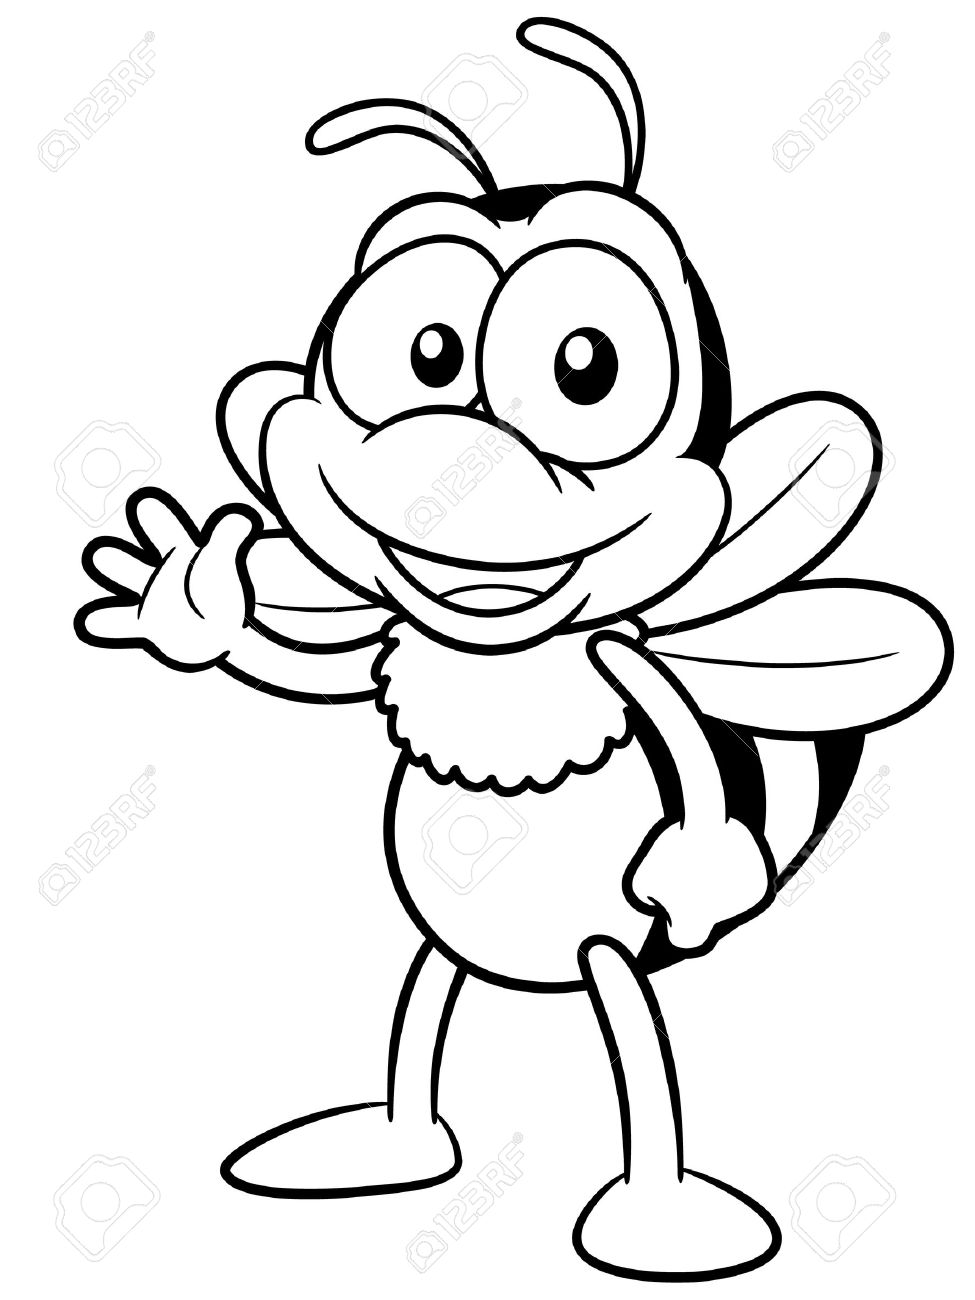 1571359405_17813670-illustration-of-cartoon-bee-coloring-book